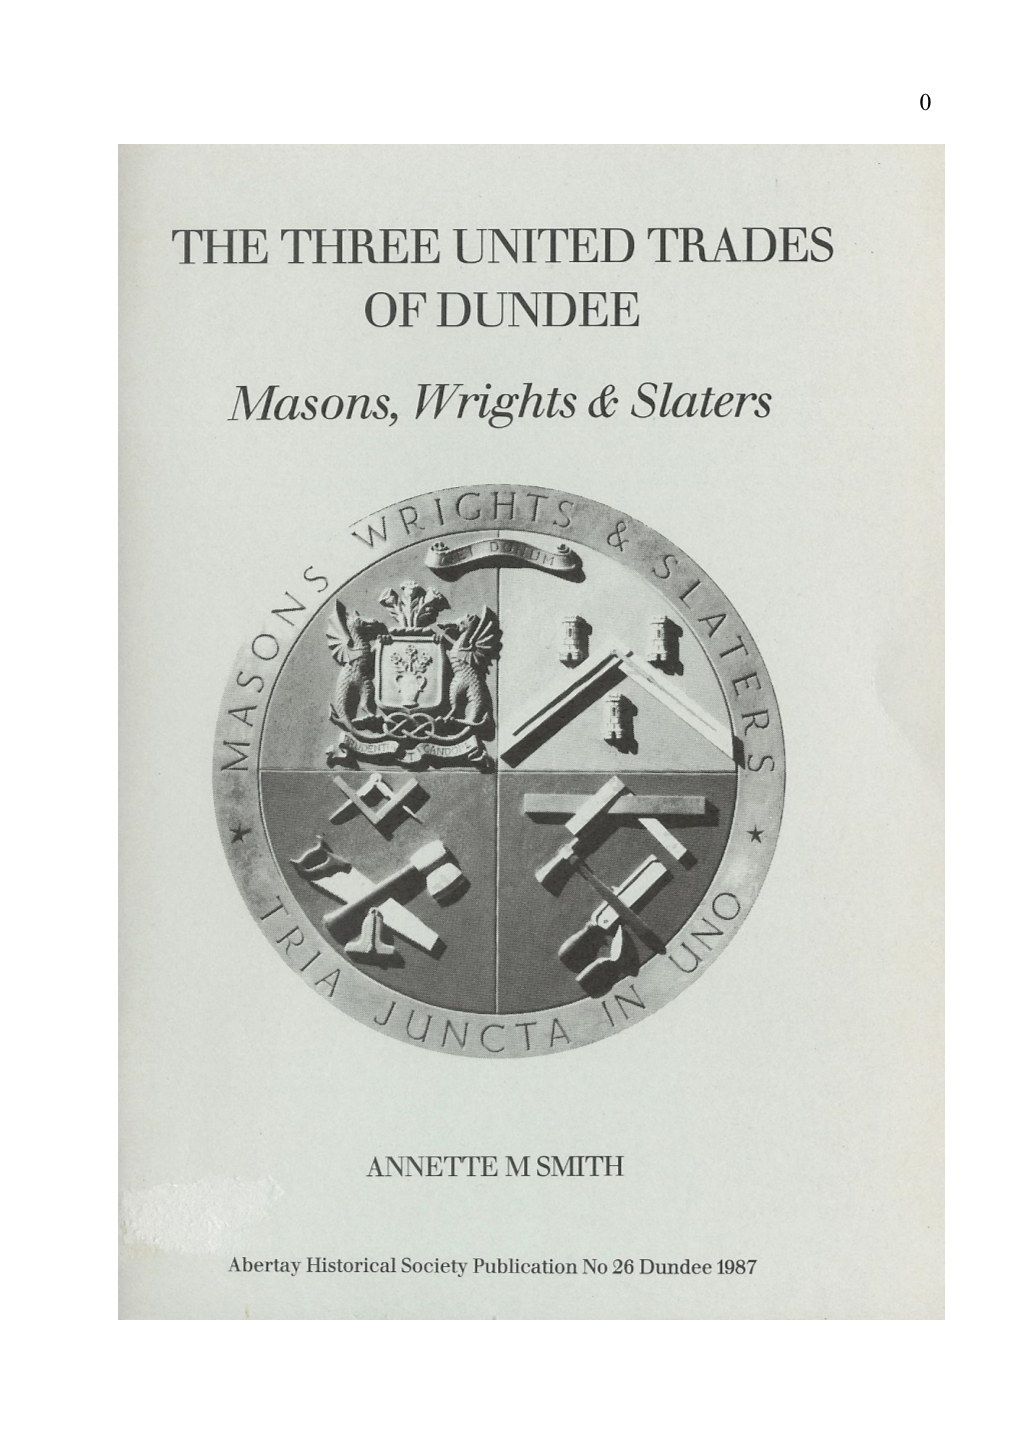 The Three United Trades of Dundee: Masons, Wrights & Slaters